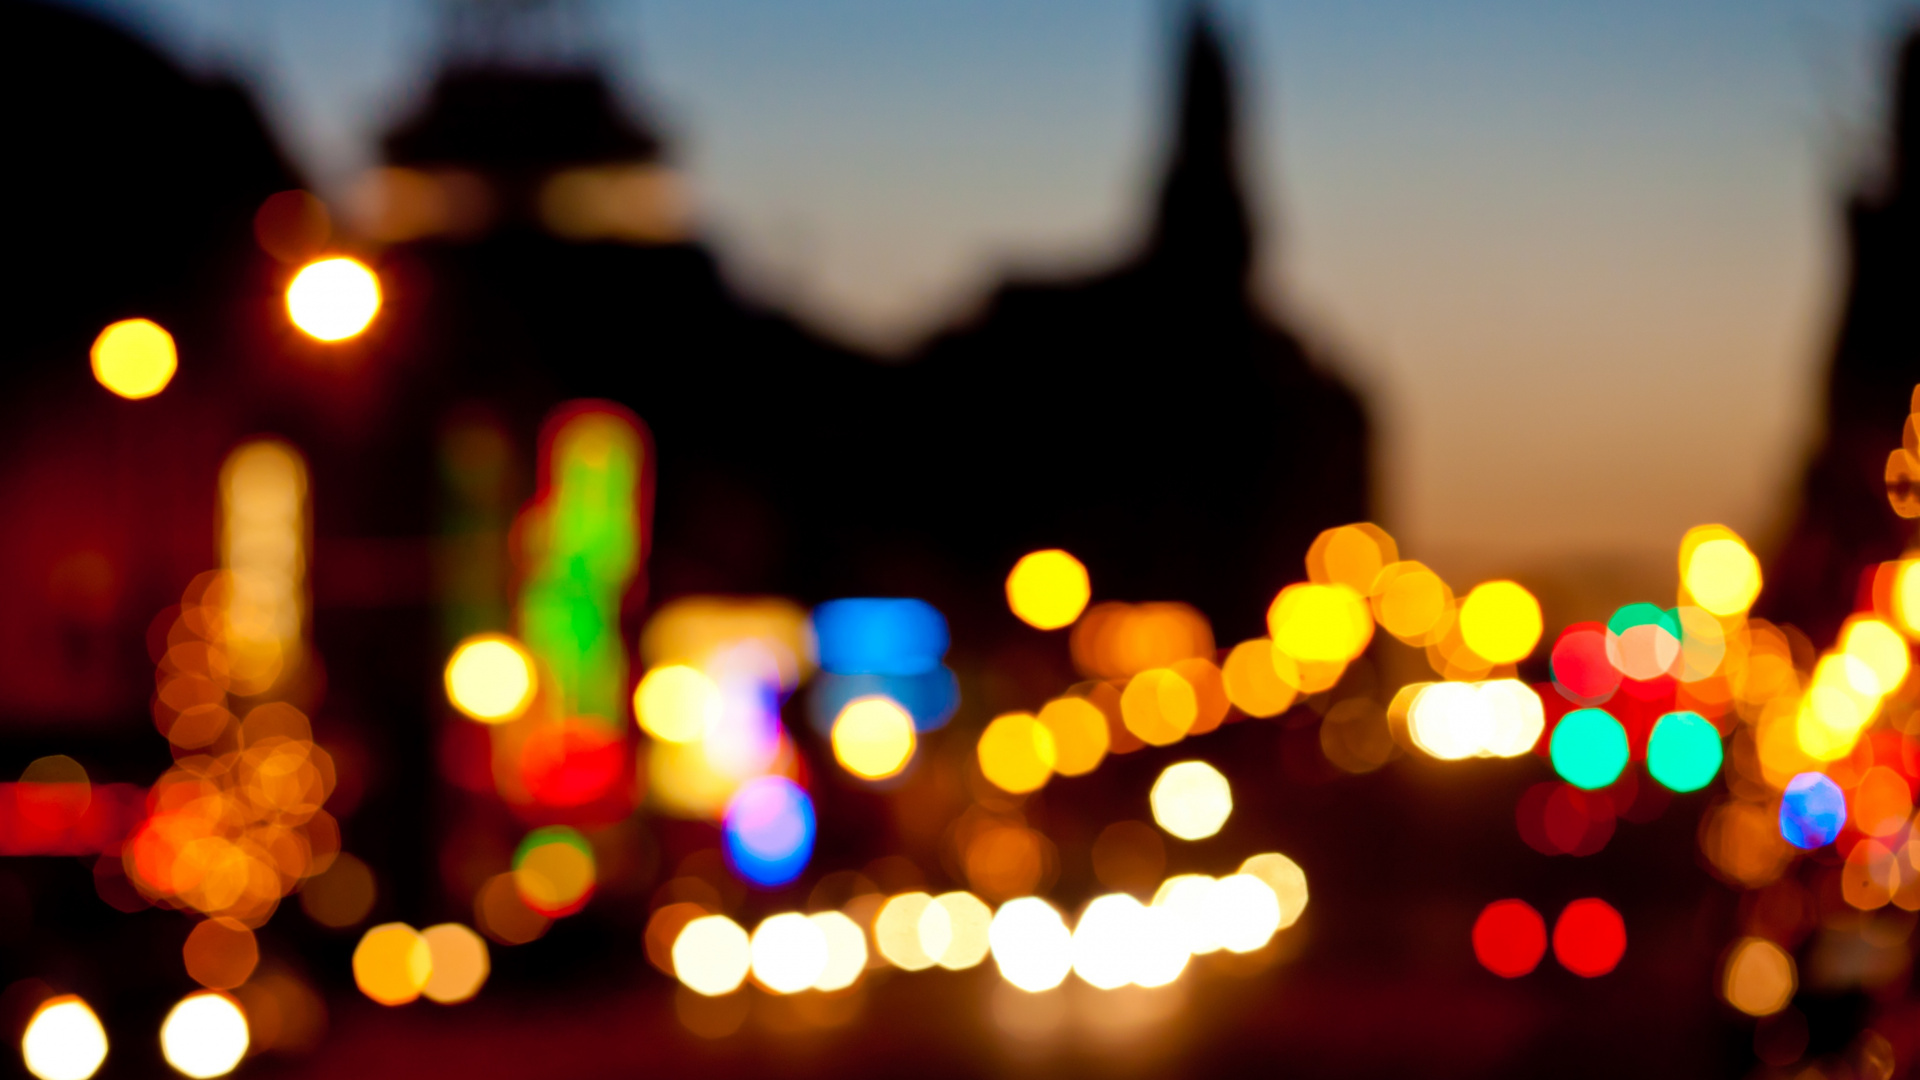 Bokeh Photography of City Lights During Night Time. Wallpaper in 1920x1080 Resolution